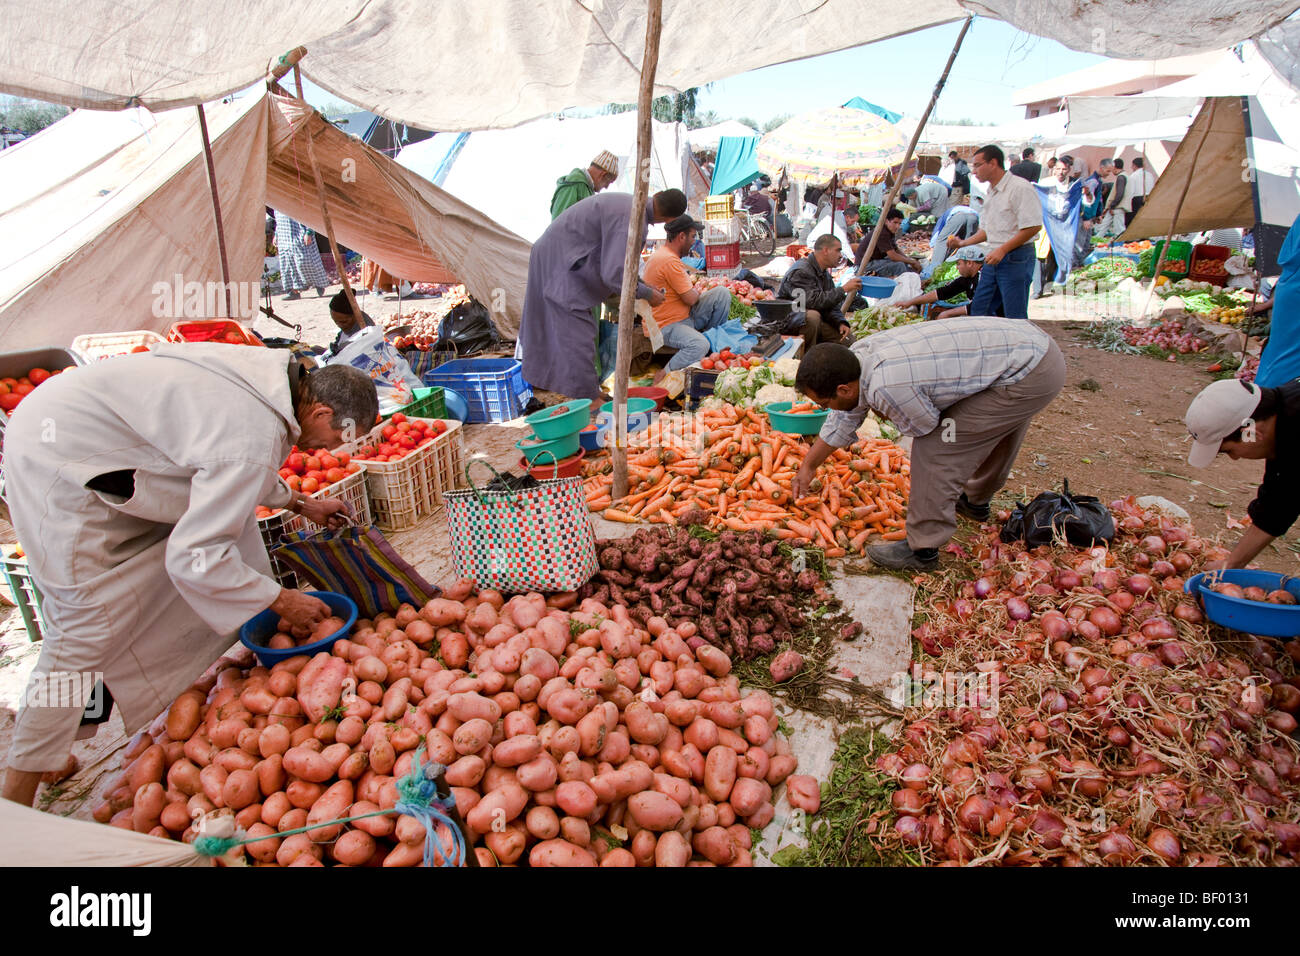 Weekly market in a berber village, High Atlas mountains, North Africa, Morocco Stock Photo